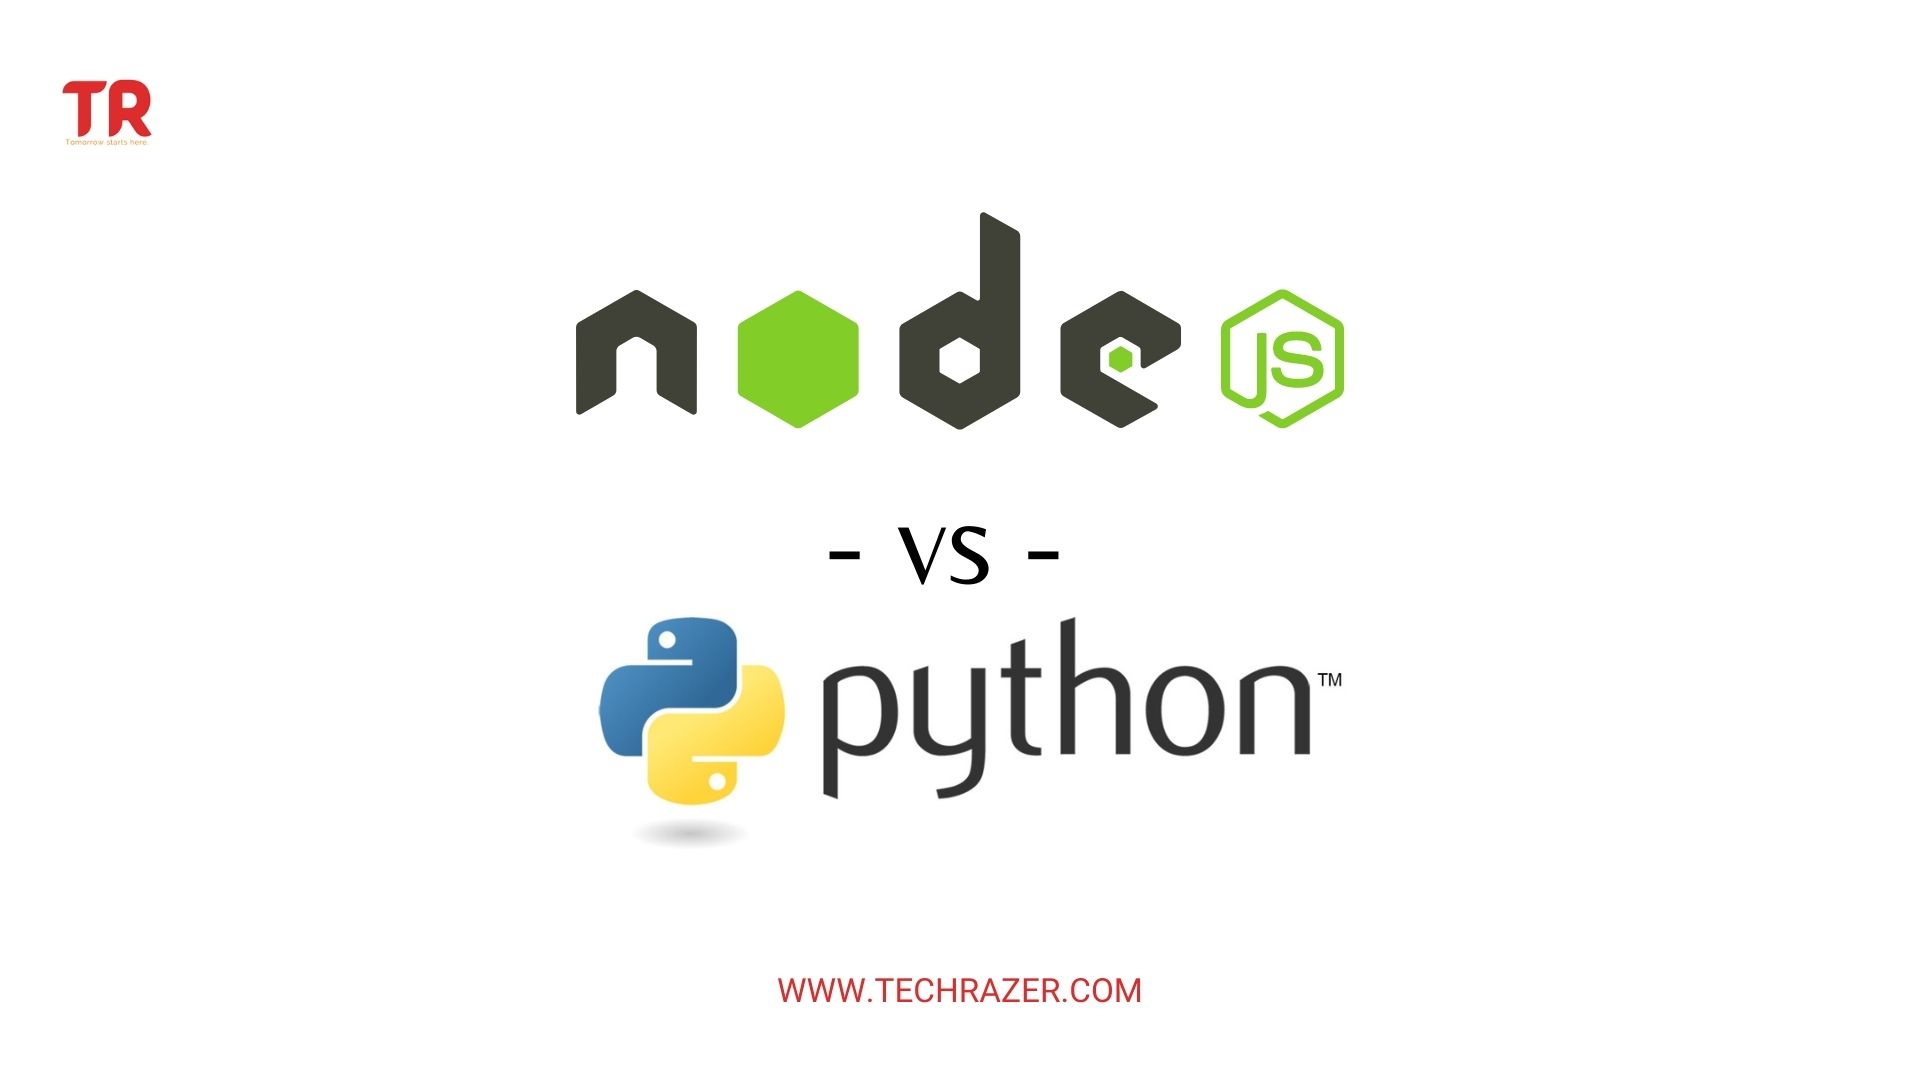 Python Vs JavaScript: Which One Is Better? - NearLearn